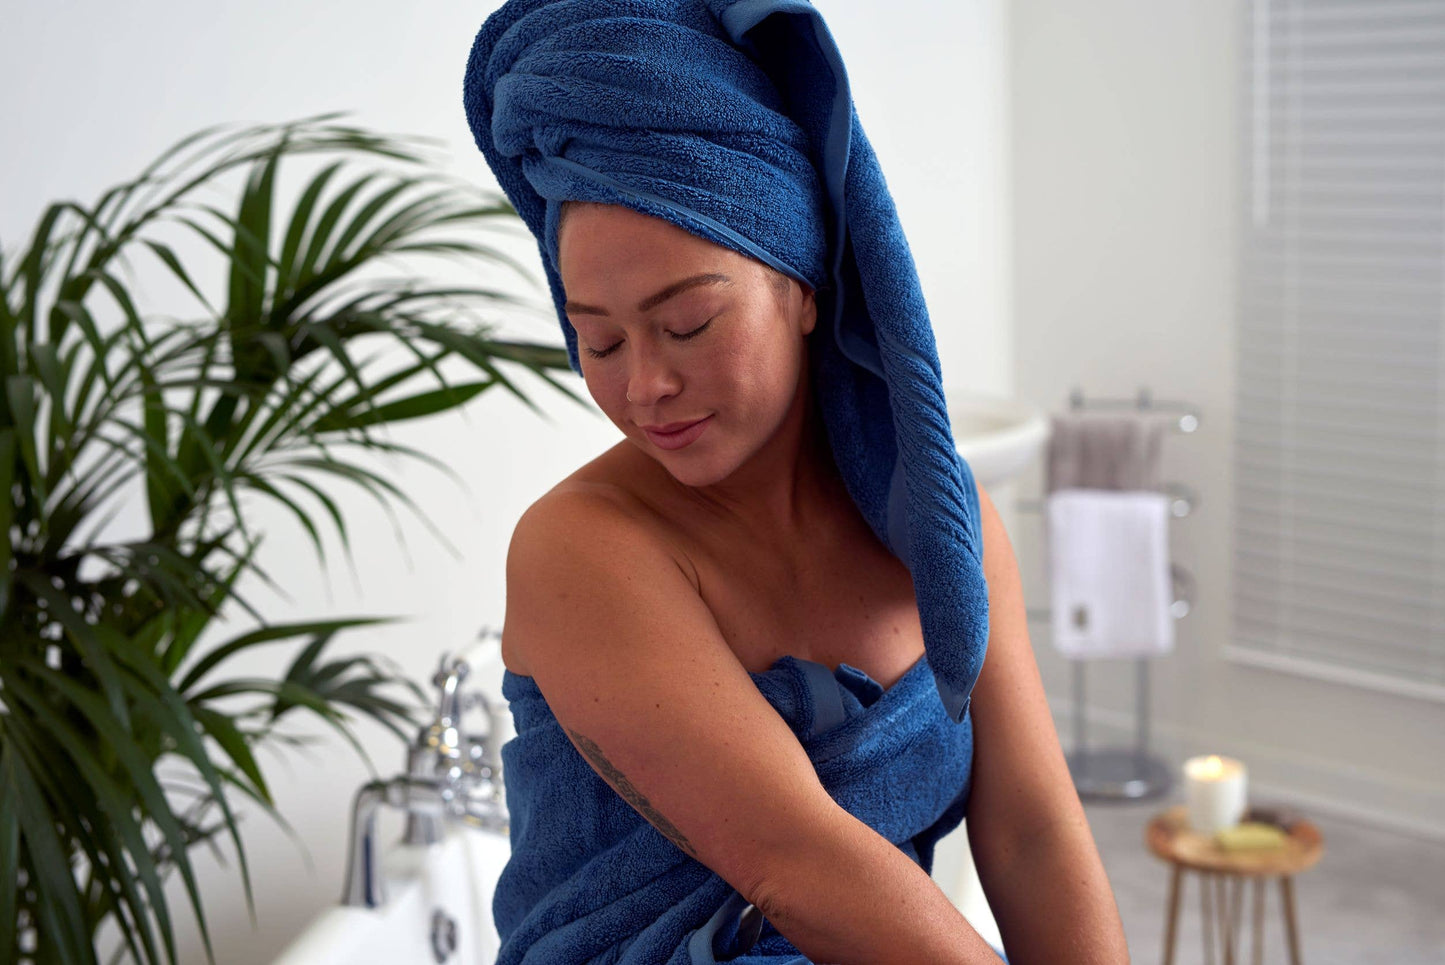 Ultra Soft Bamboo Towels: Hand Towel / Silver Grey